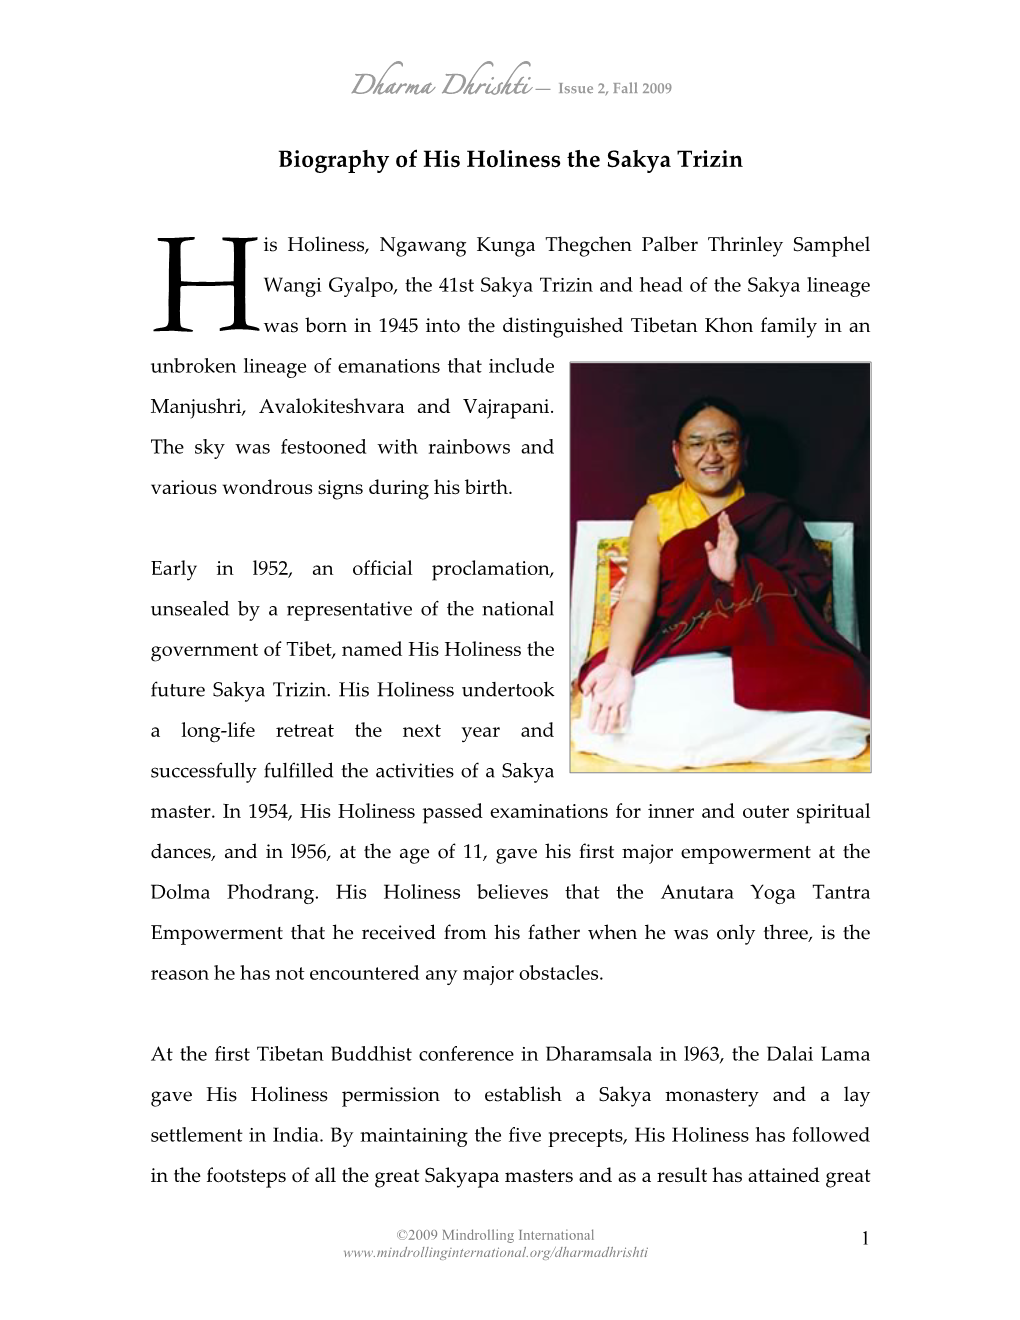 Biography of His Holiness the Sakya Trizin